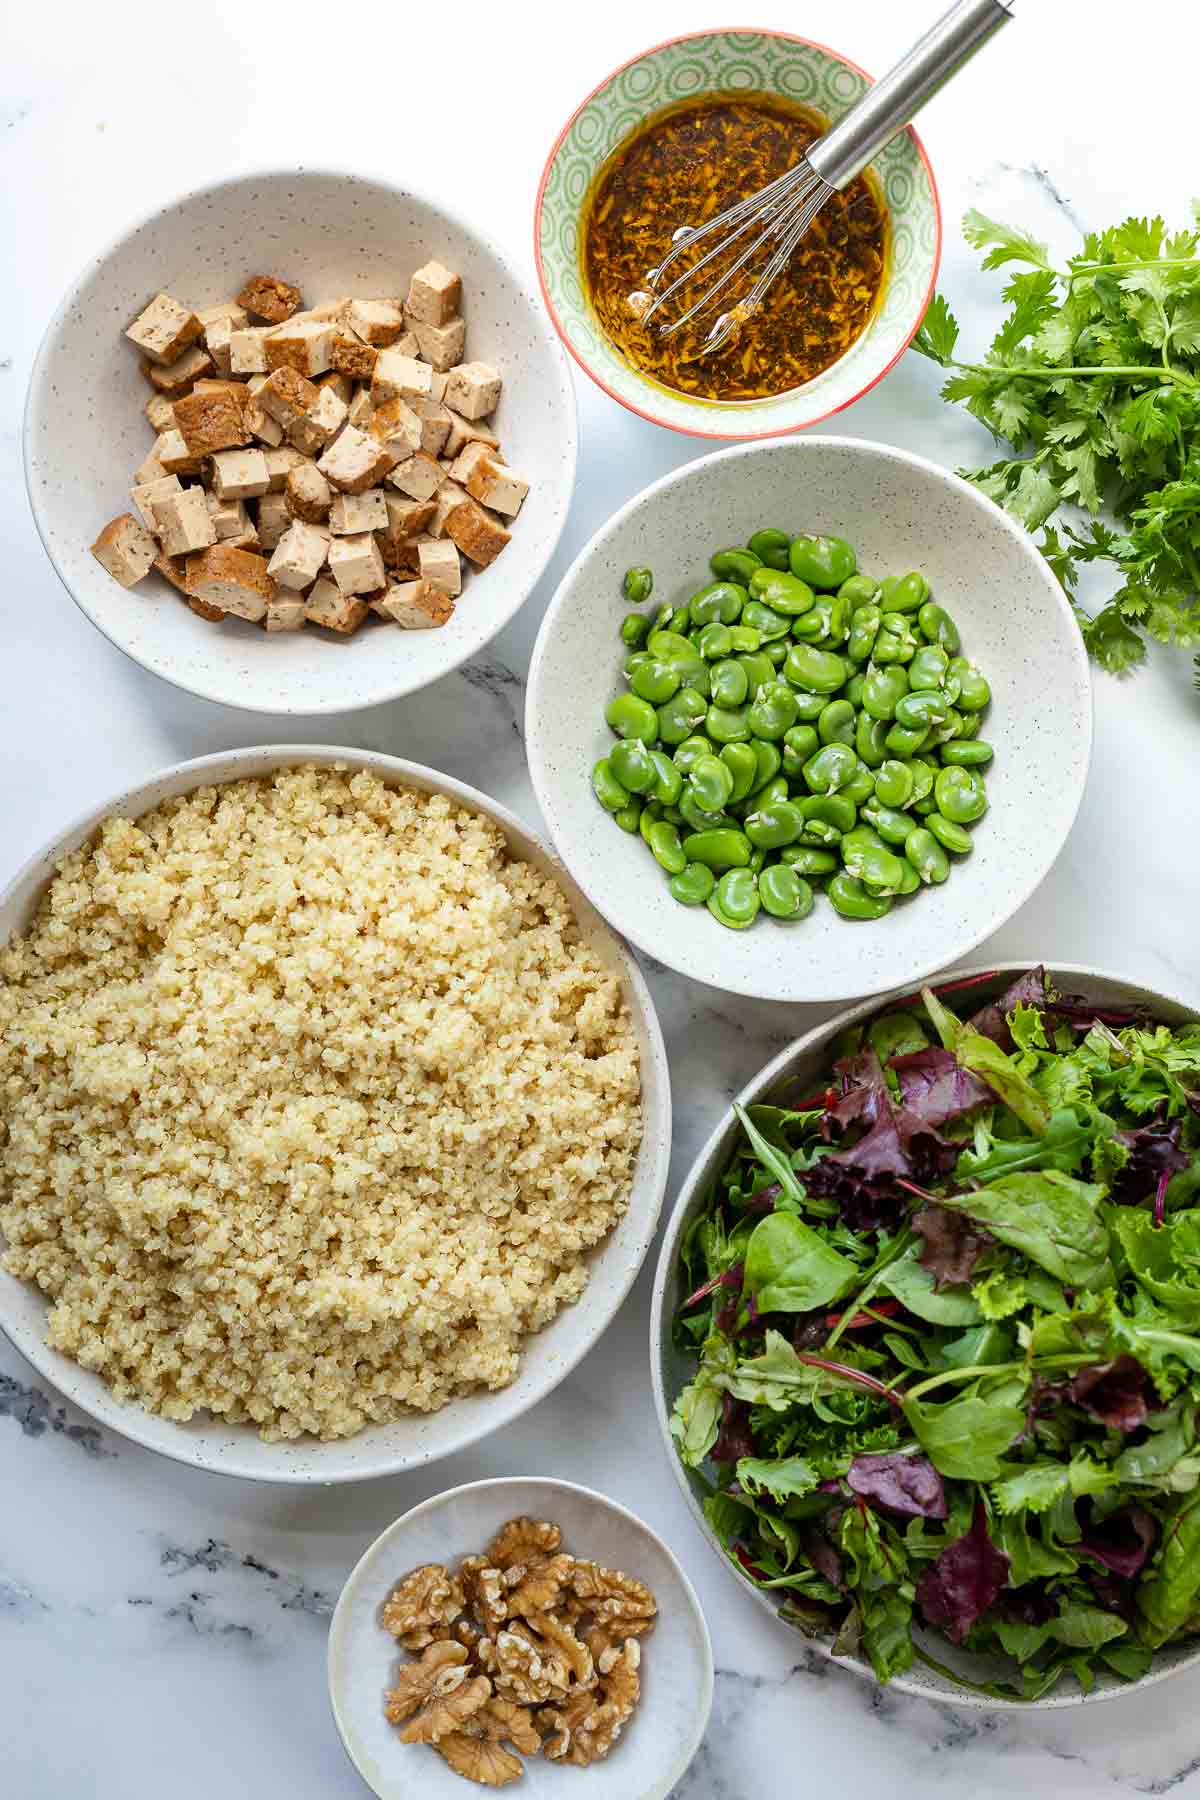 Ingredients for Asian-Style Quinoa Salad